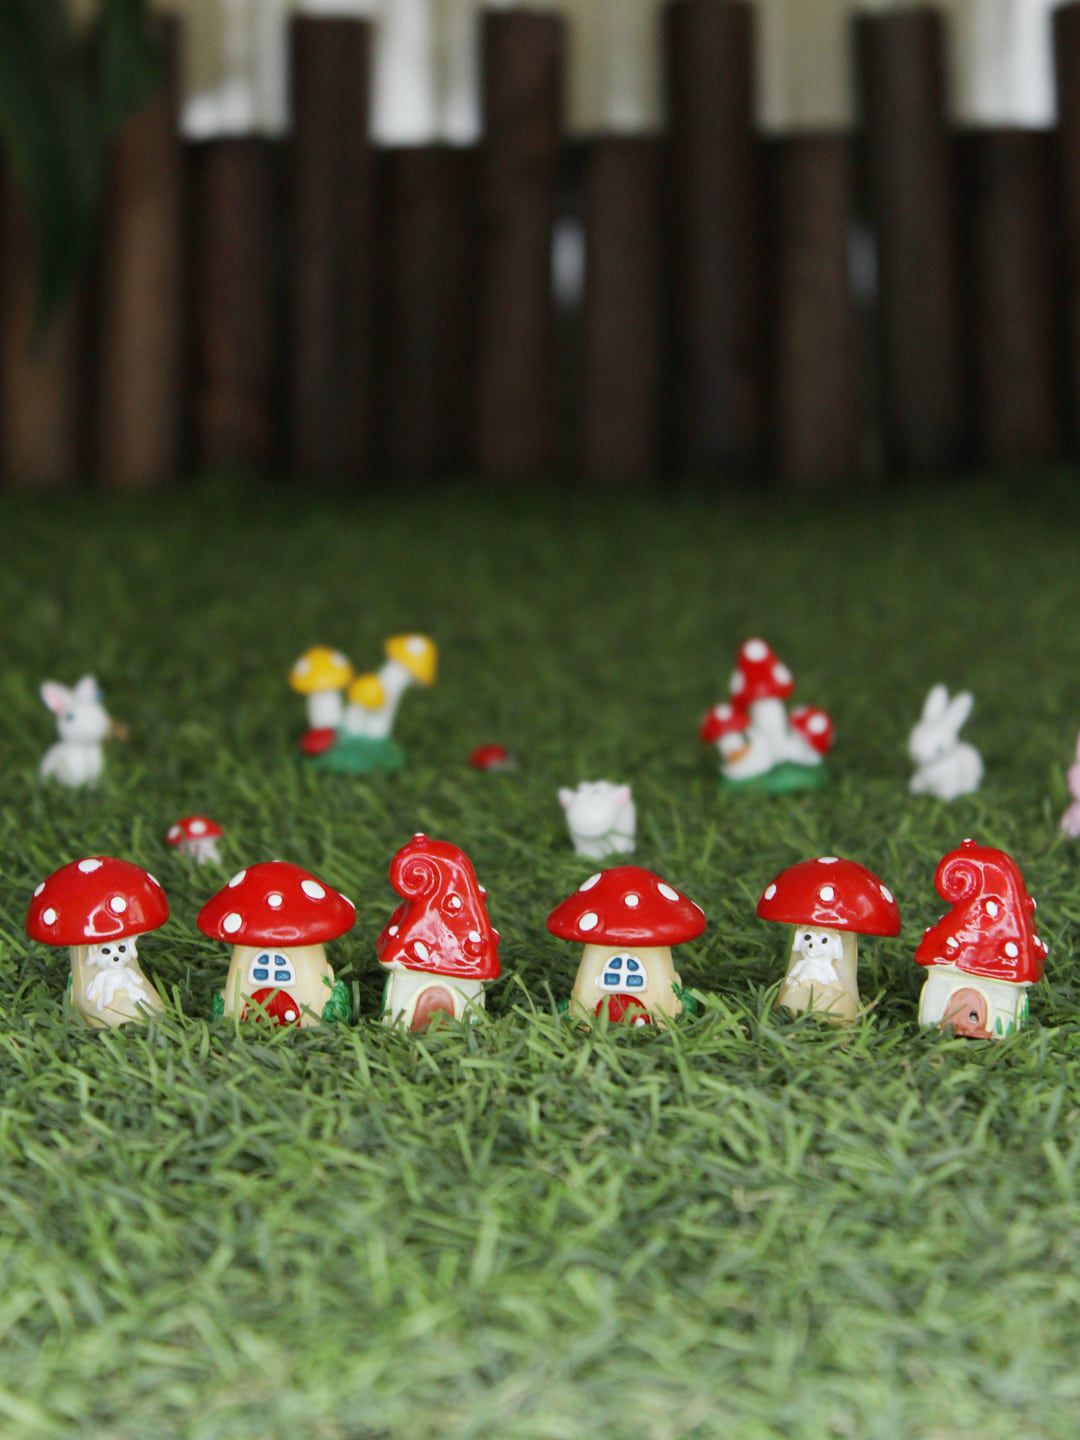 Wonderland Red & White Small Mushroom Houses Miniature Toys Set Of 6 Price in India